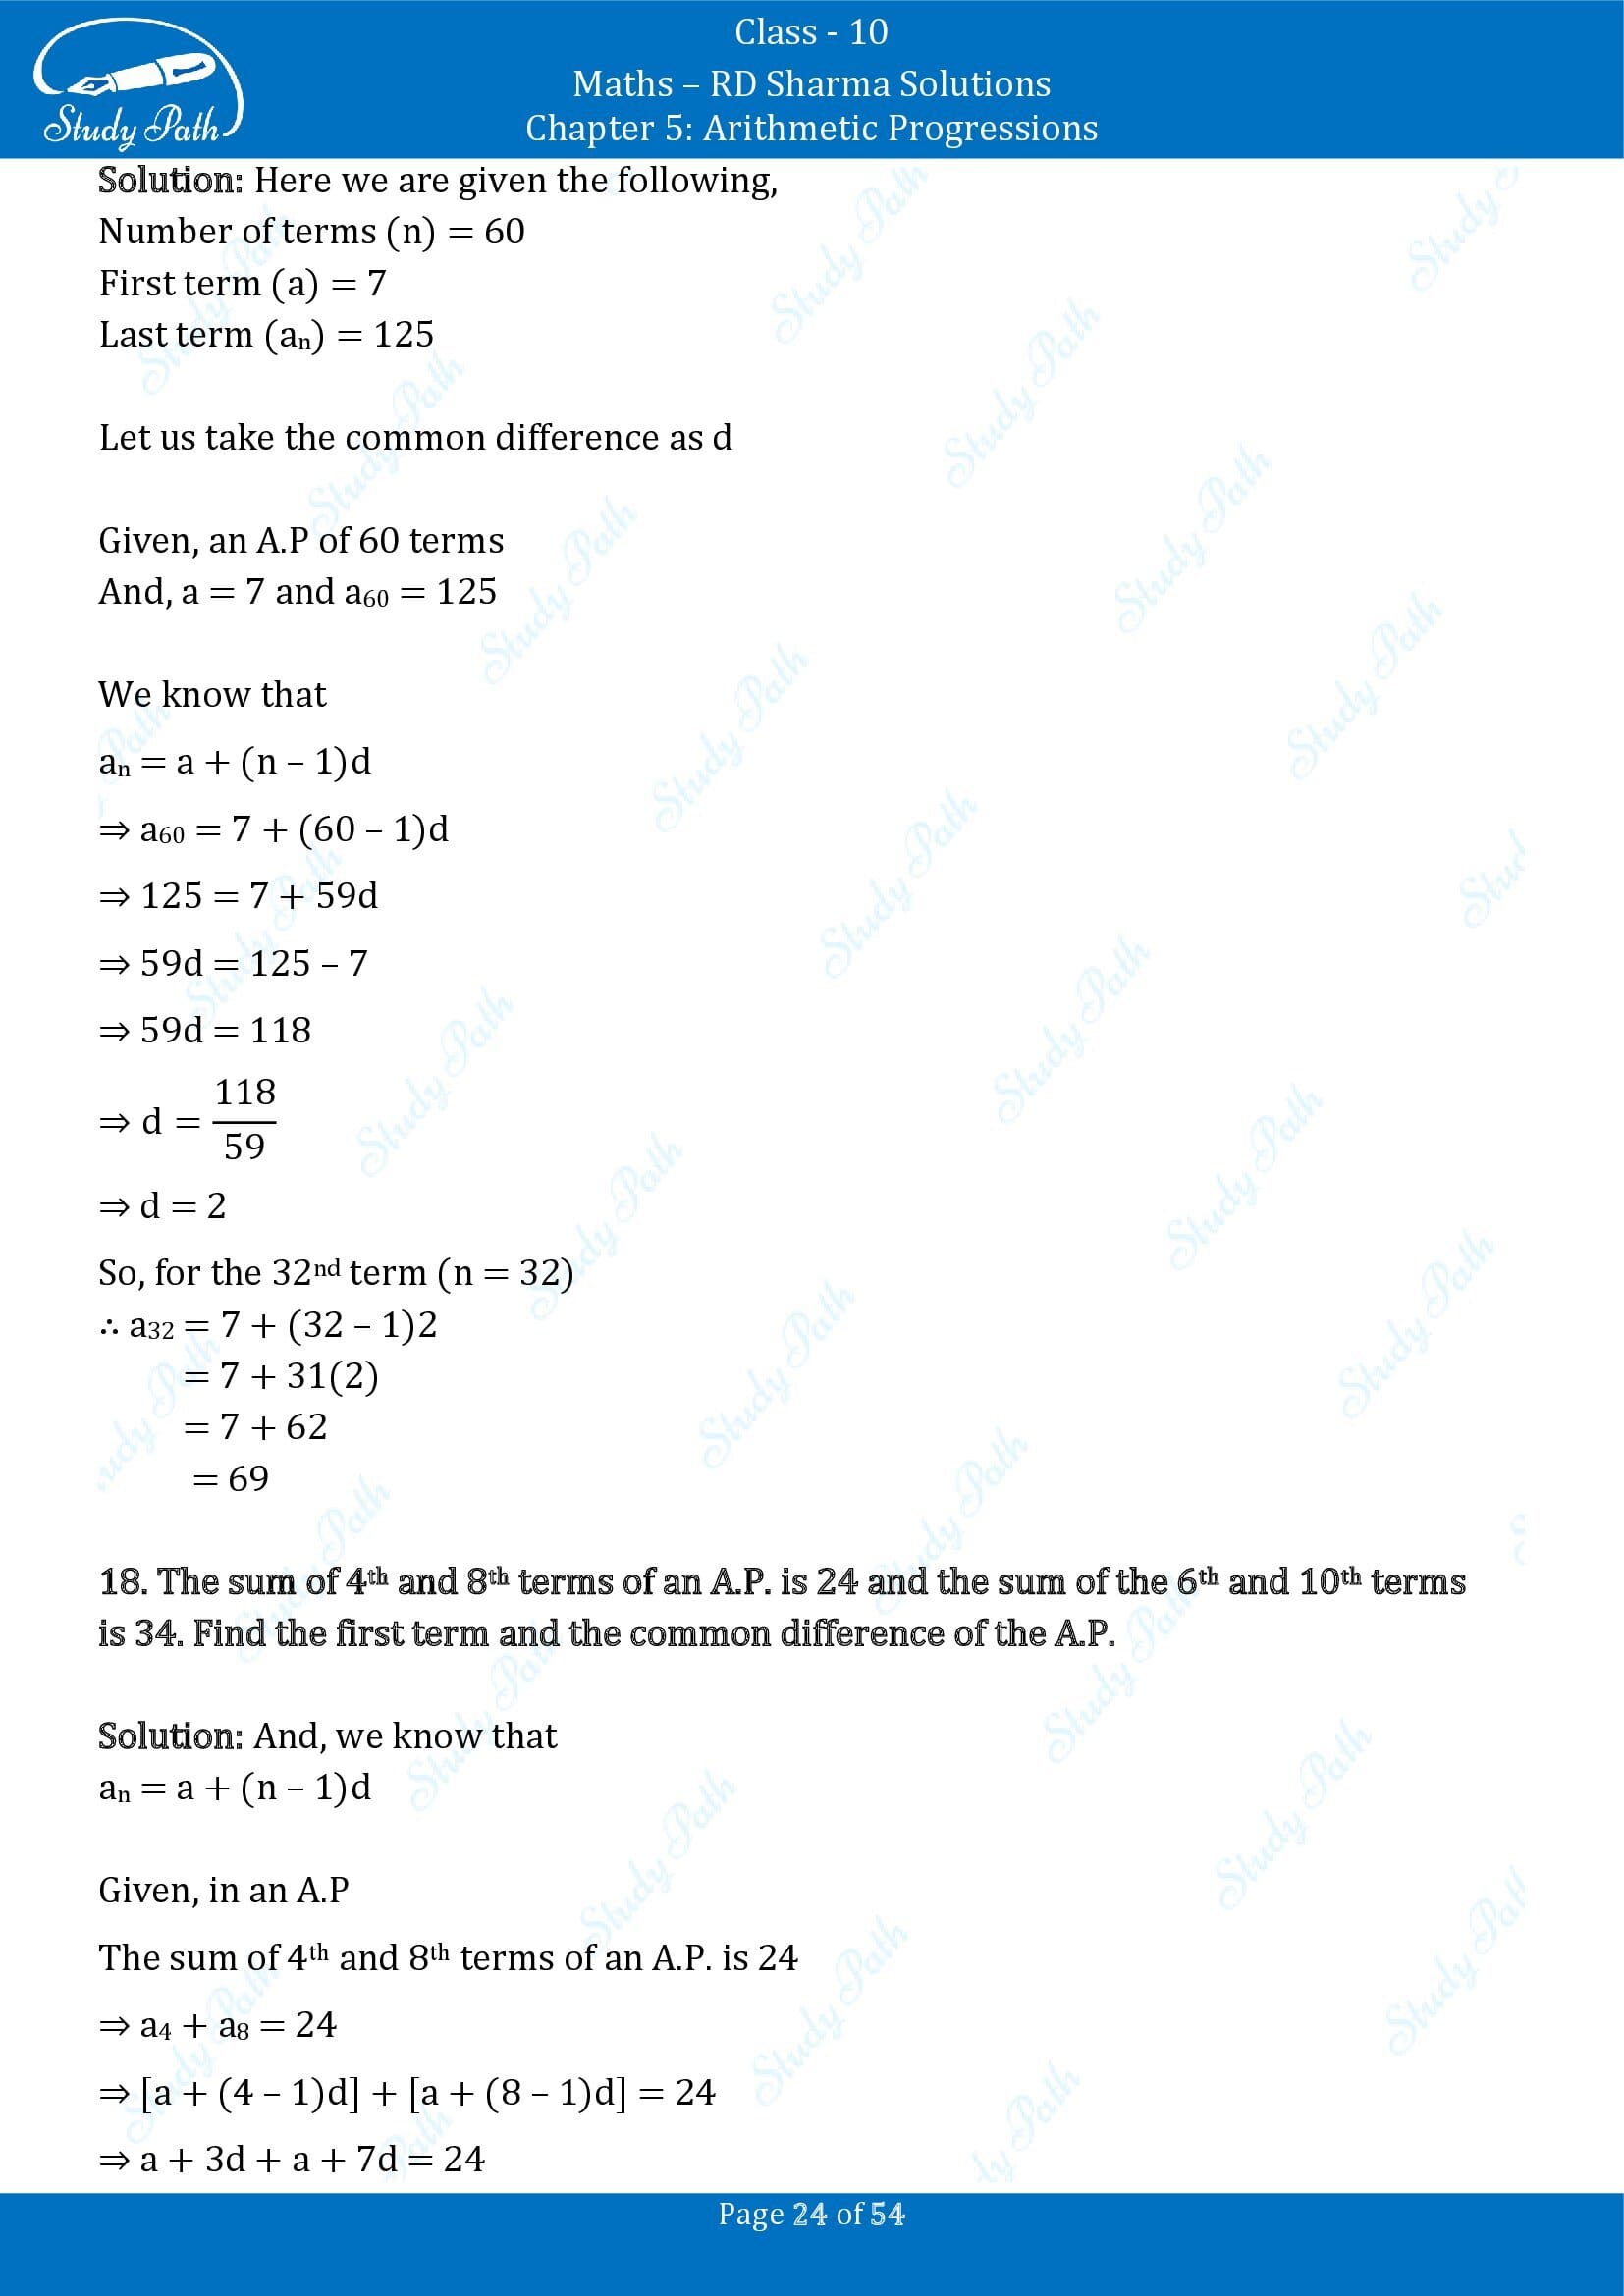 RD Sharma Solutions Class 10 Chapter 5 Arithmetic Progressions Exercise 5.4 00024